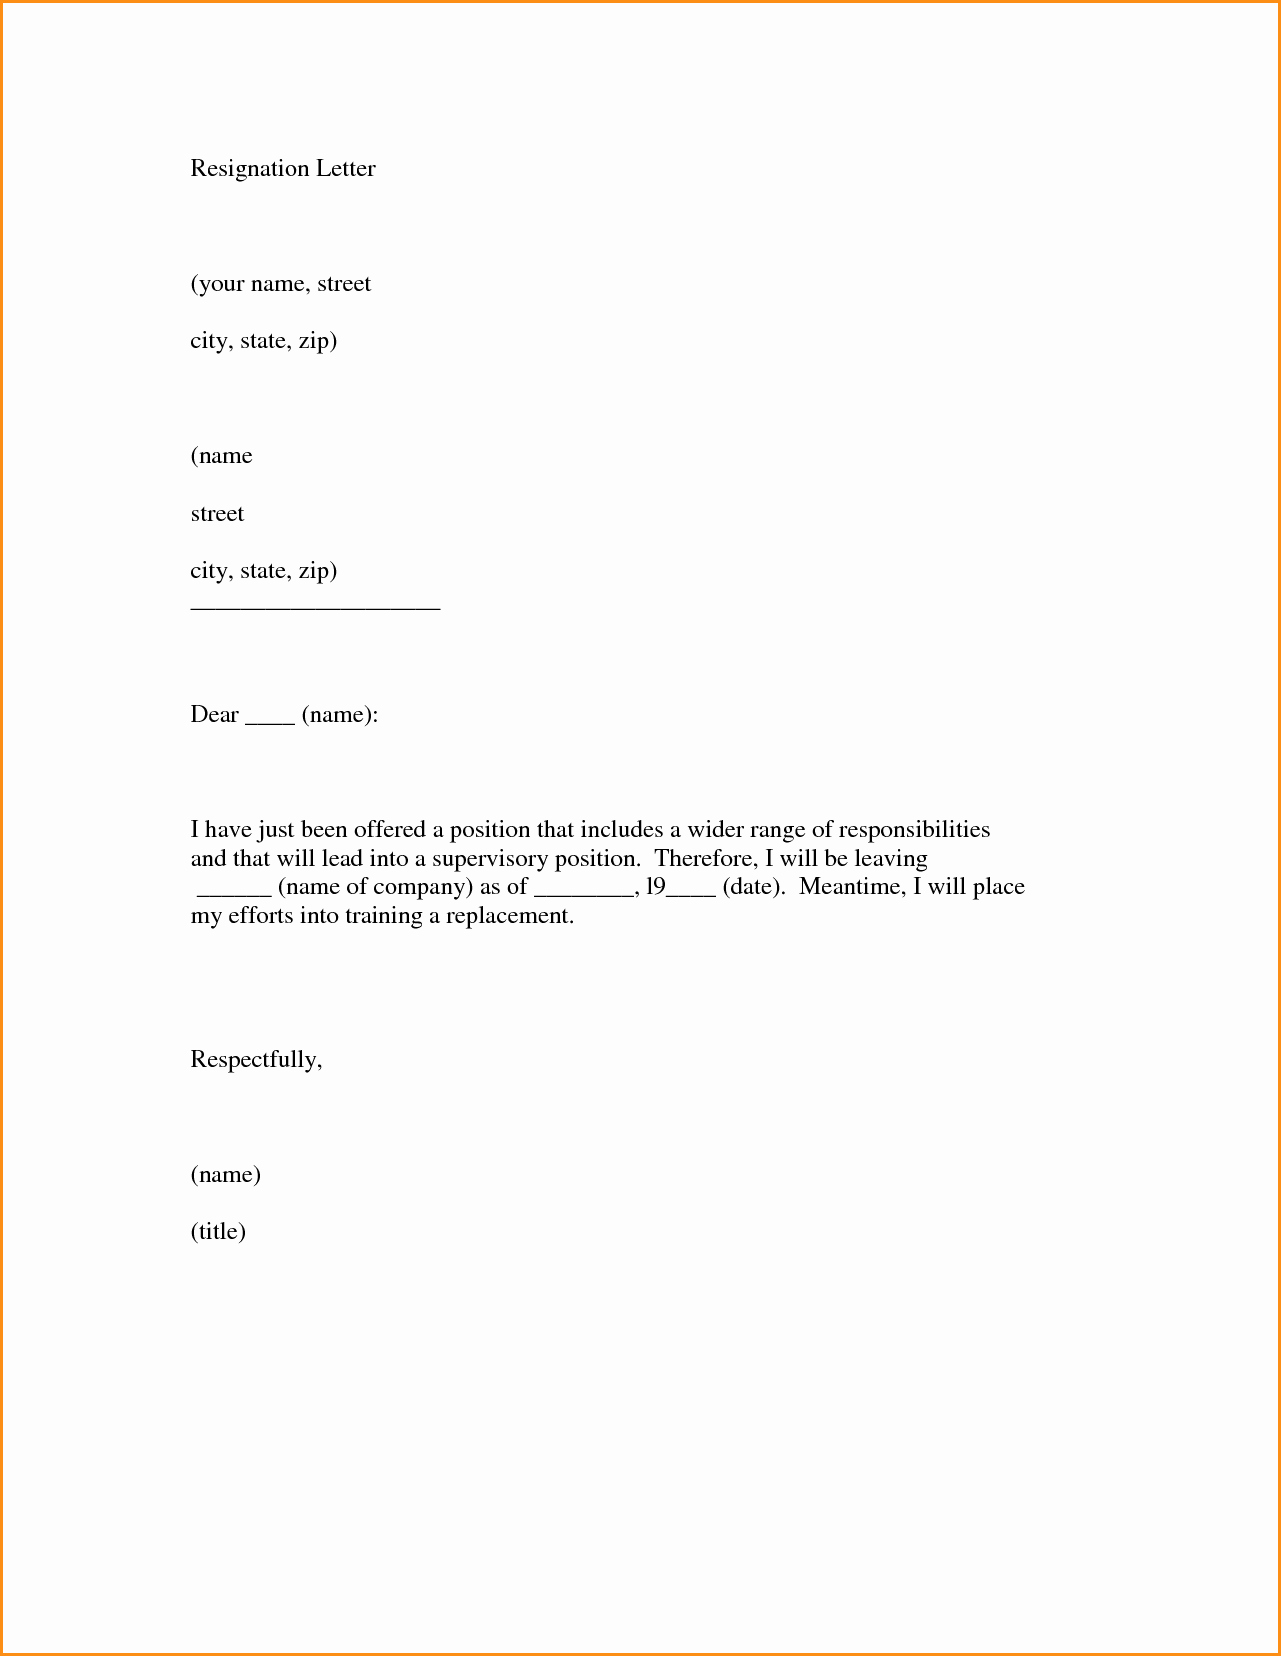 10 Good Letters Of Resignation